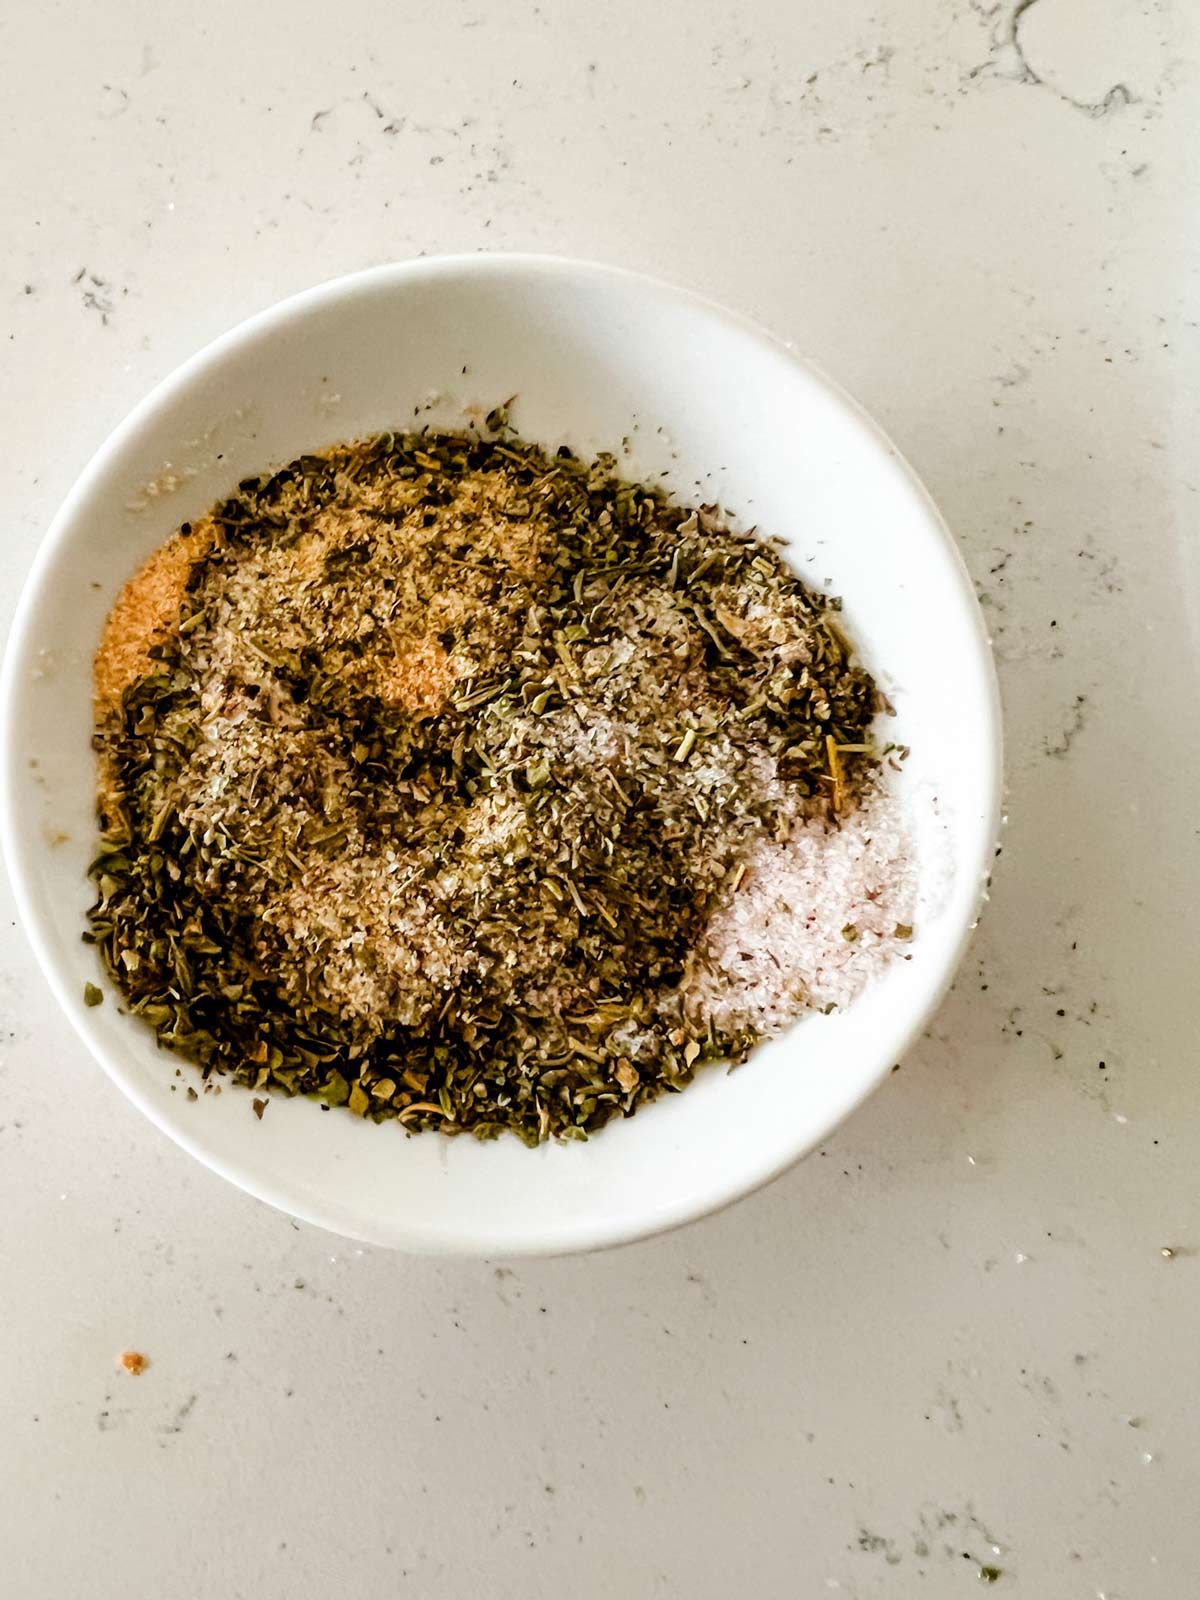 Seasoning mixture in a small white dish.